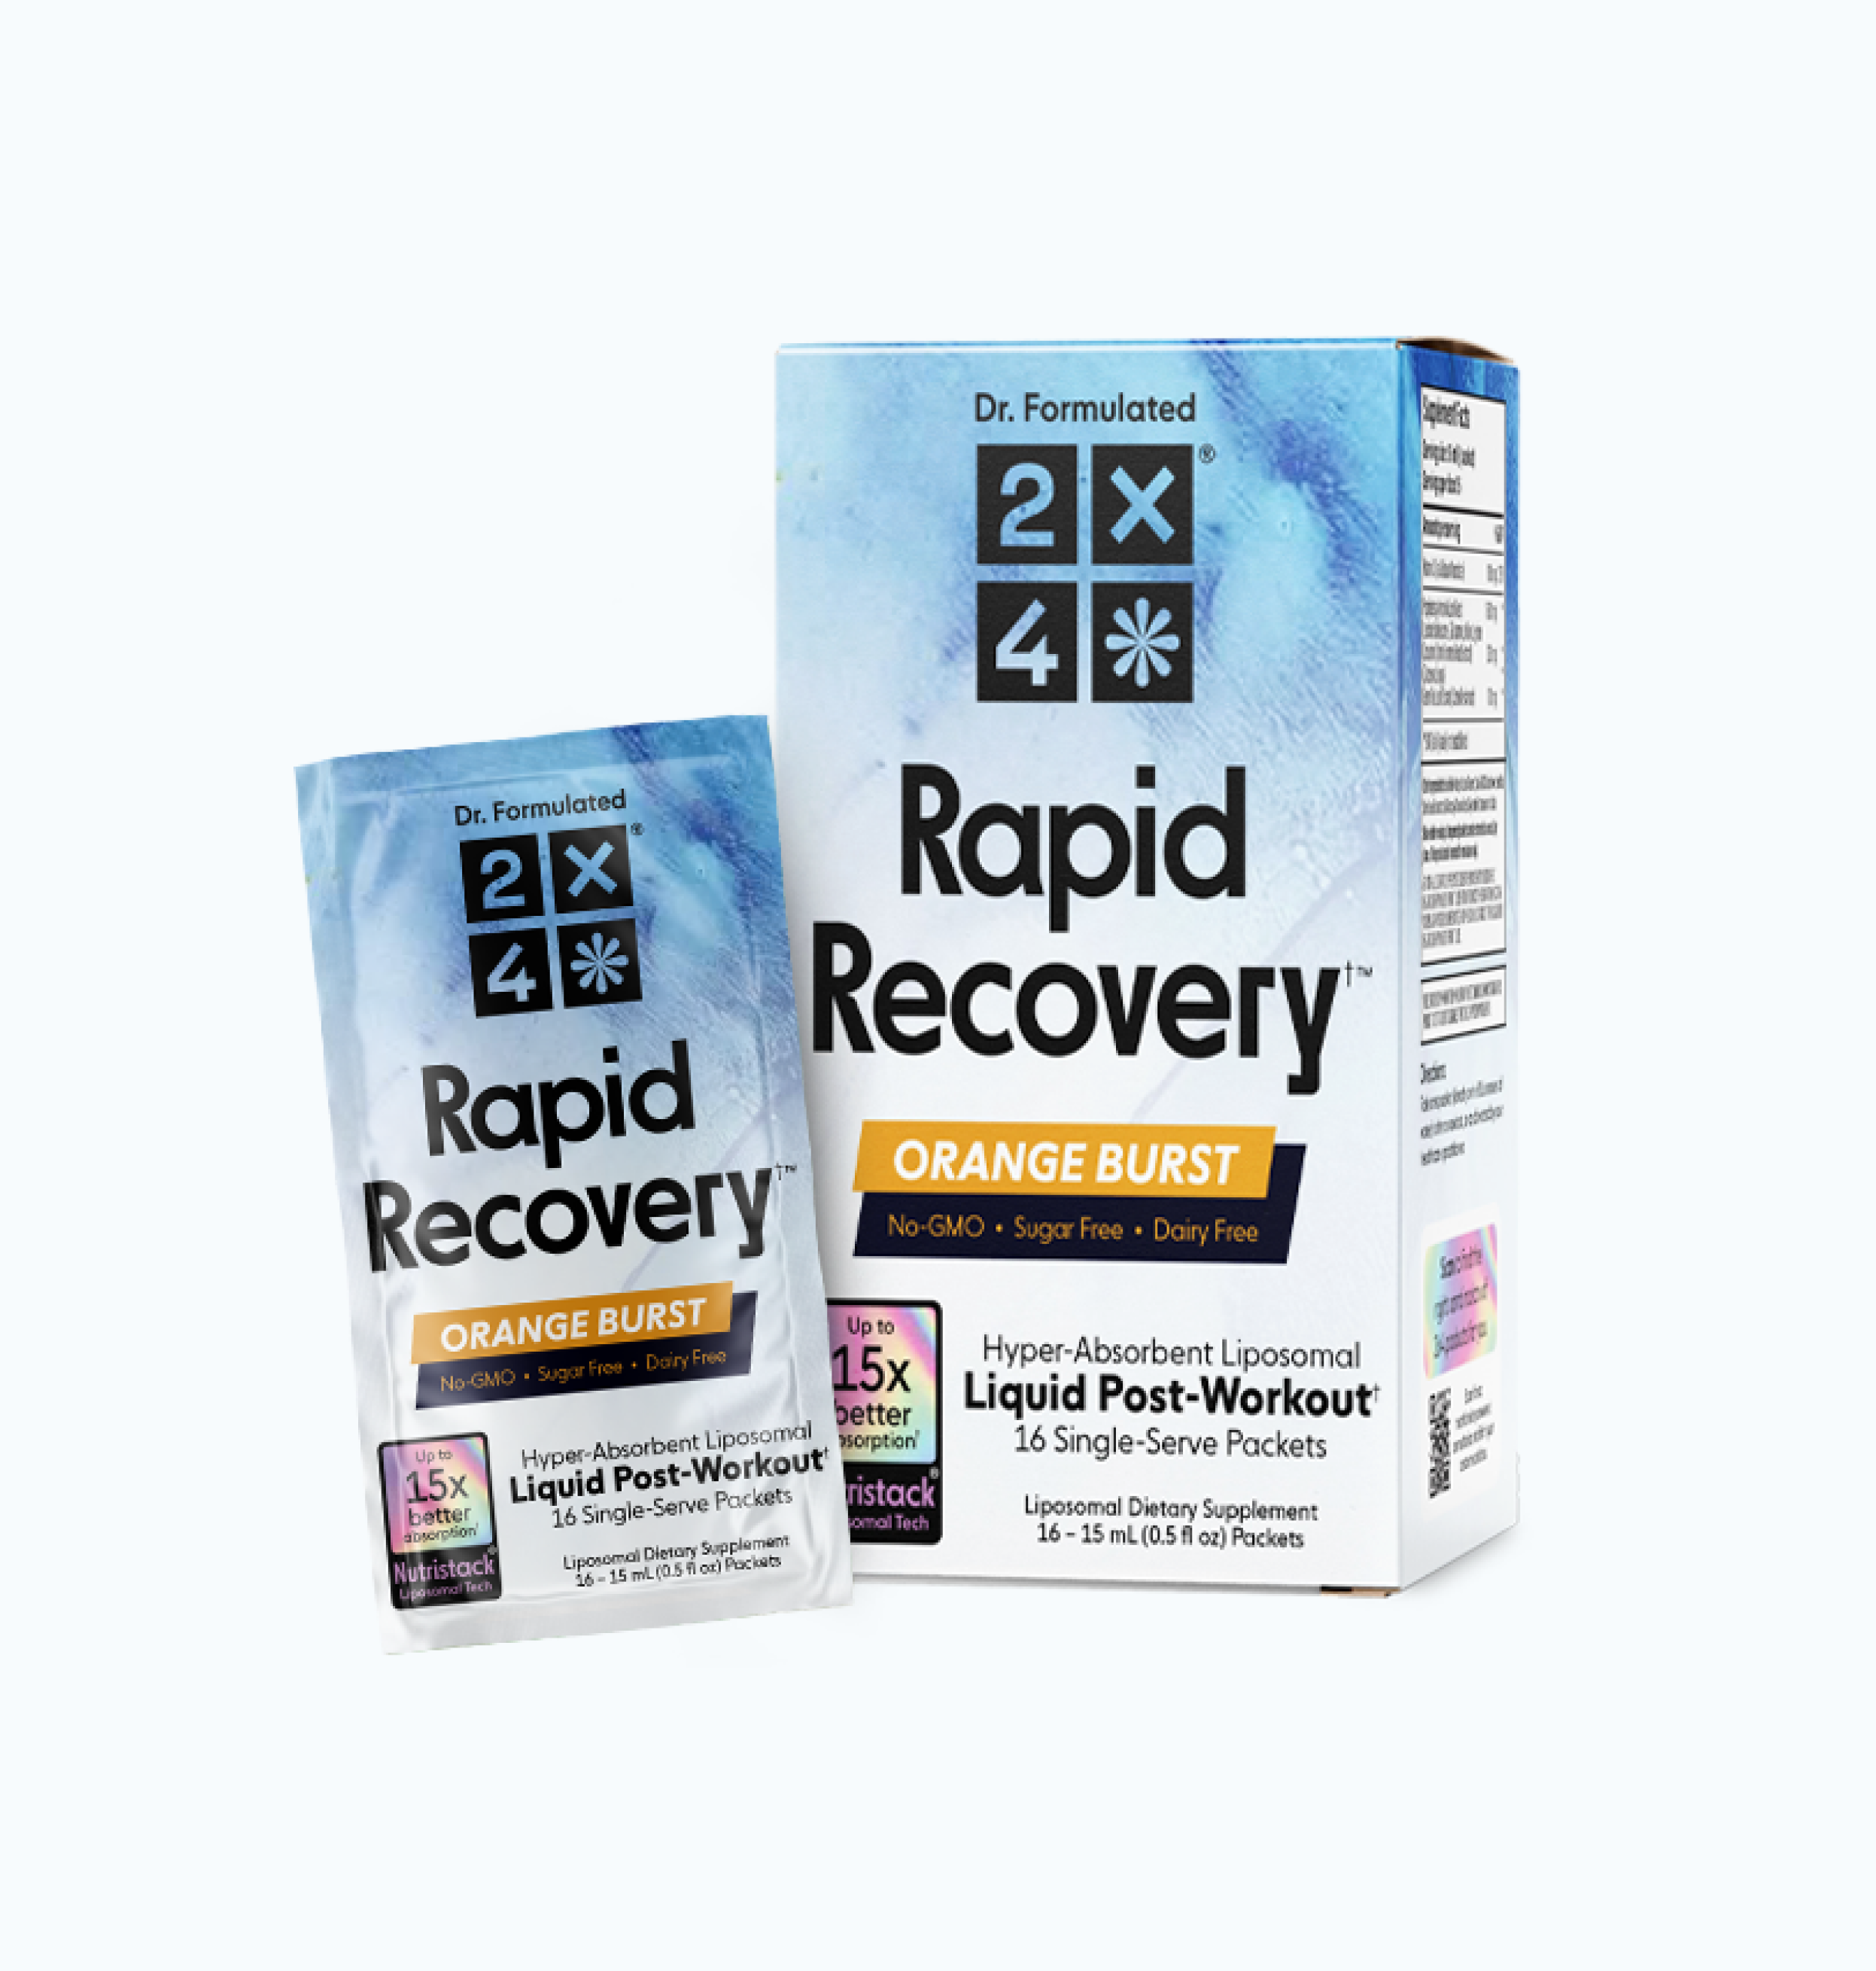 2x4 Rapid Recovery